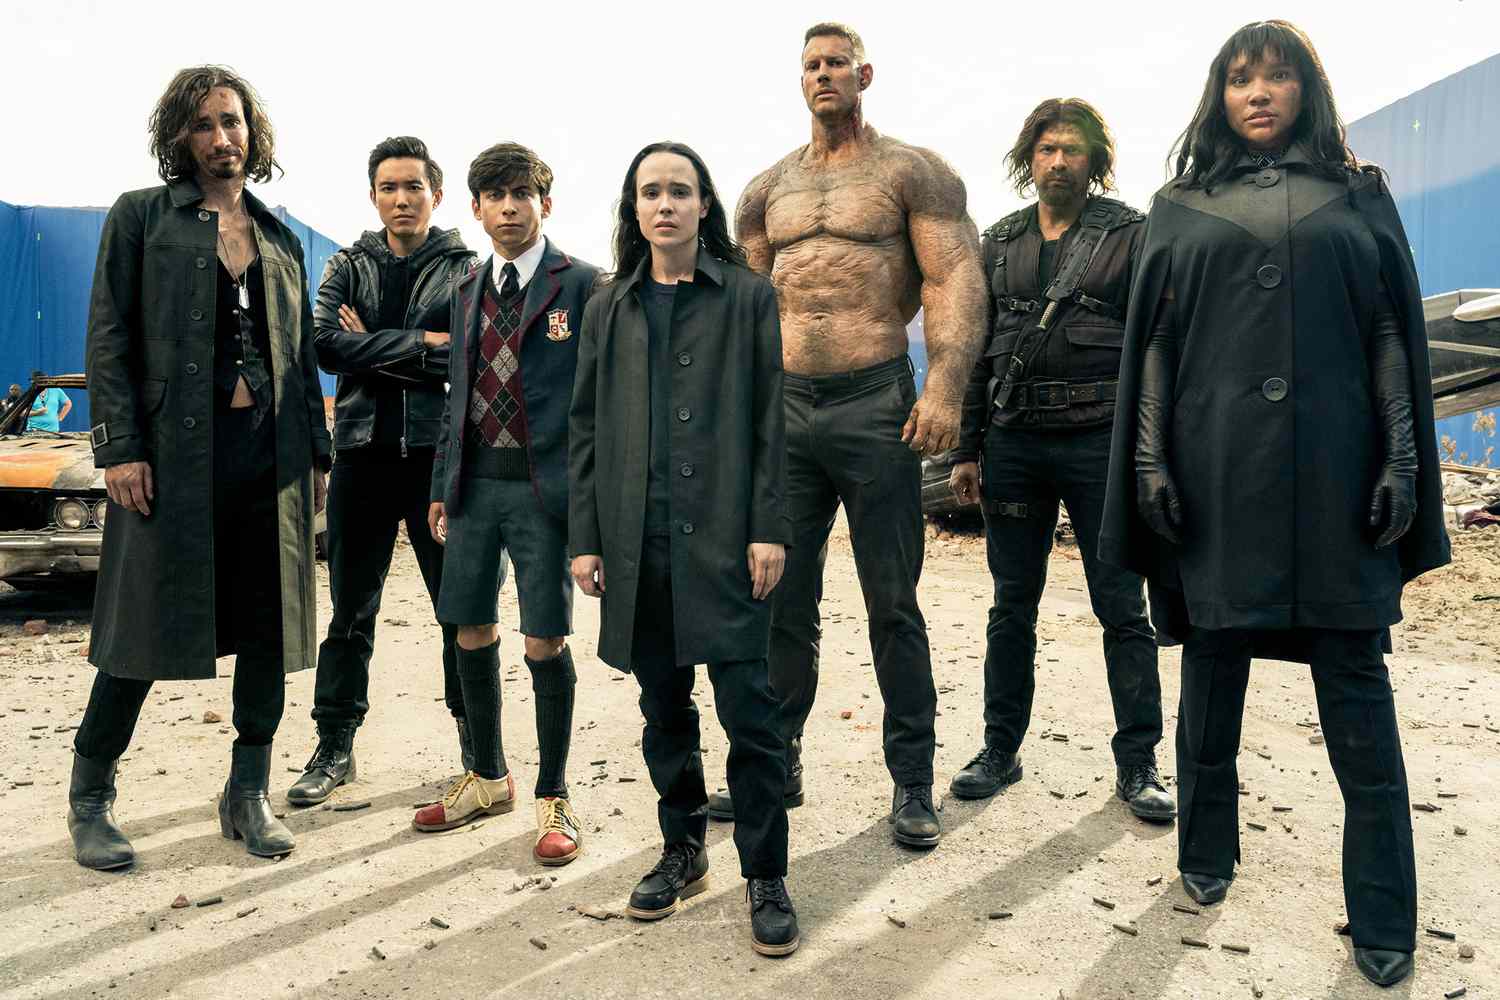 THE UMBRELLA ACADEMY (L to R) ROBERT SHEEHAN as KLAUS HARGREEVES, JUSTIN H. MIN as BEN HARGREEVES, AIDAN GALLAGHER as NUMBER FIVE, ELLIOT PAGE as VANYA HARGREEVES, TOM HOPPER as LUTHER HARGREEVES, DAVID CASTAÑEDA as DIEGO HARGREEVES and EMMY RAVER-LAMPMAN as ALLISON HARGREEVES in episode 201 of THE UMBRELLA ACADEMY